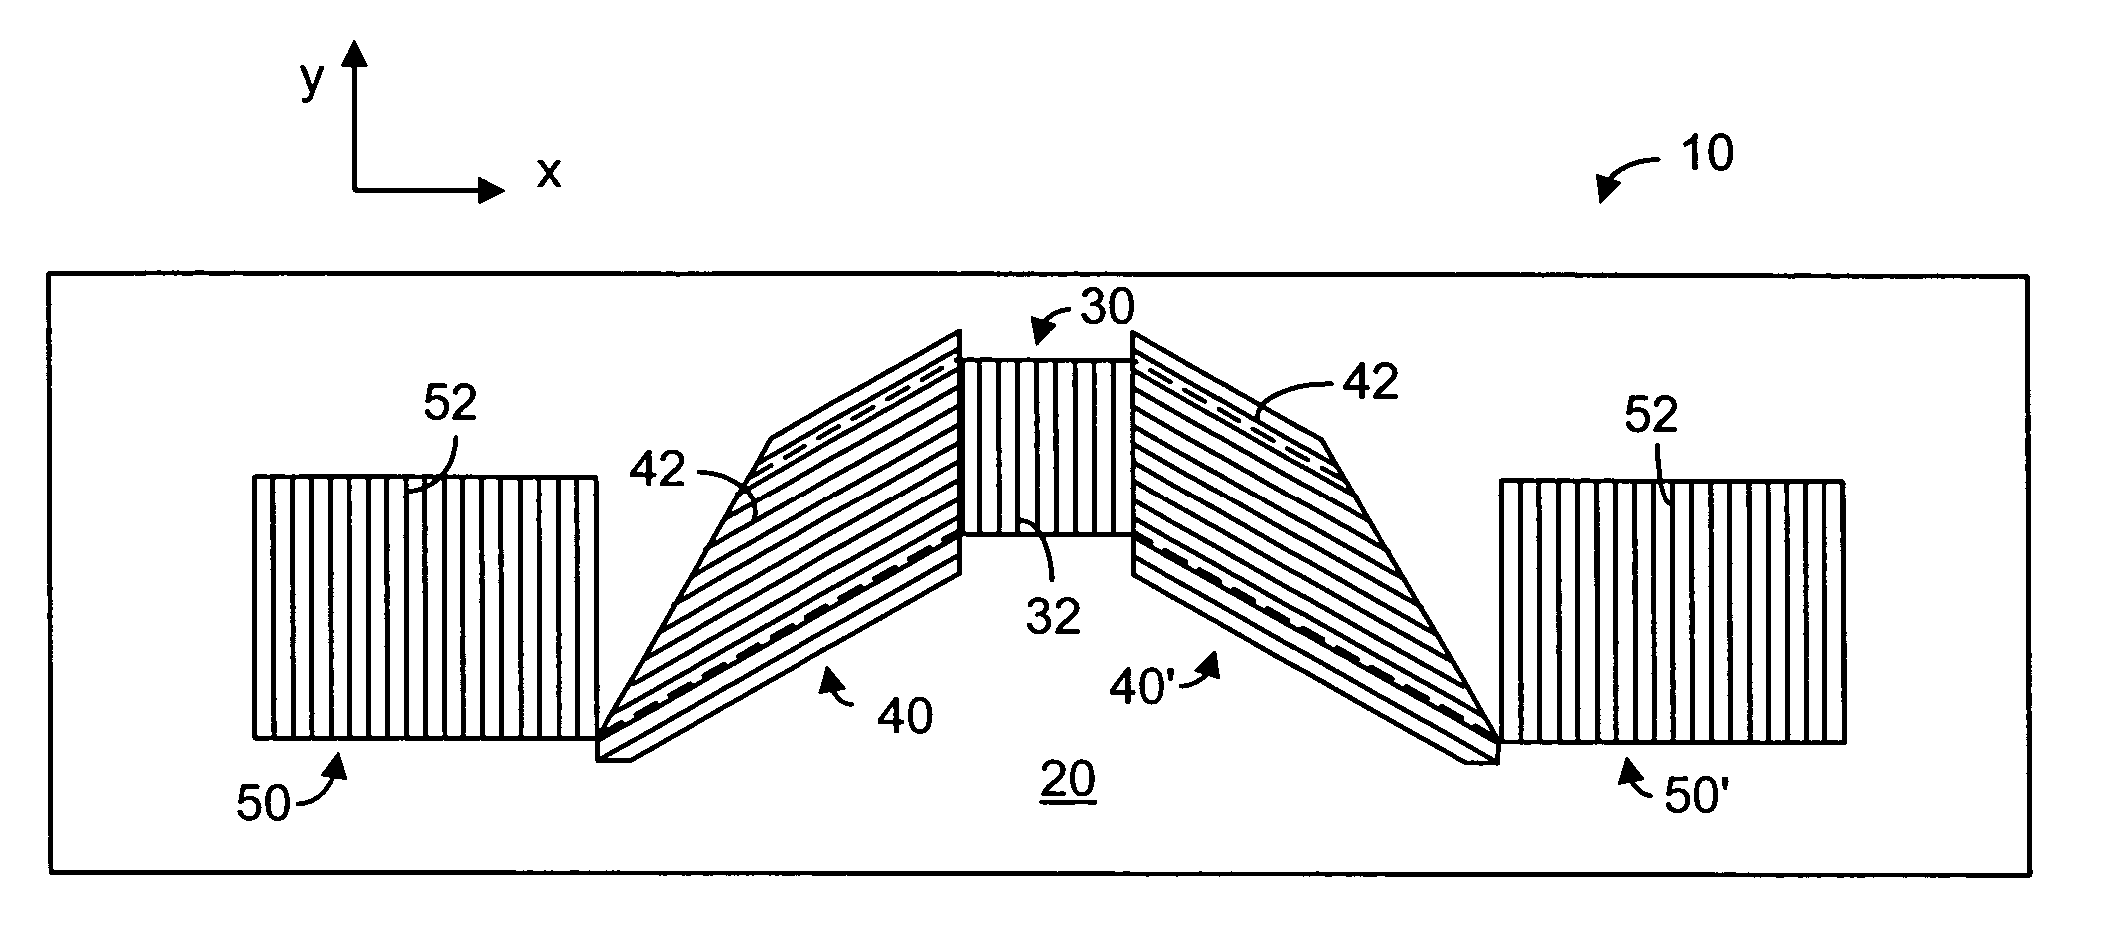 General diffractive optics method for expanding an exit pupil